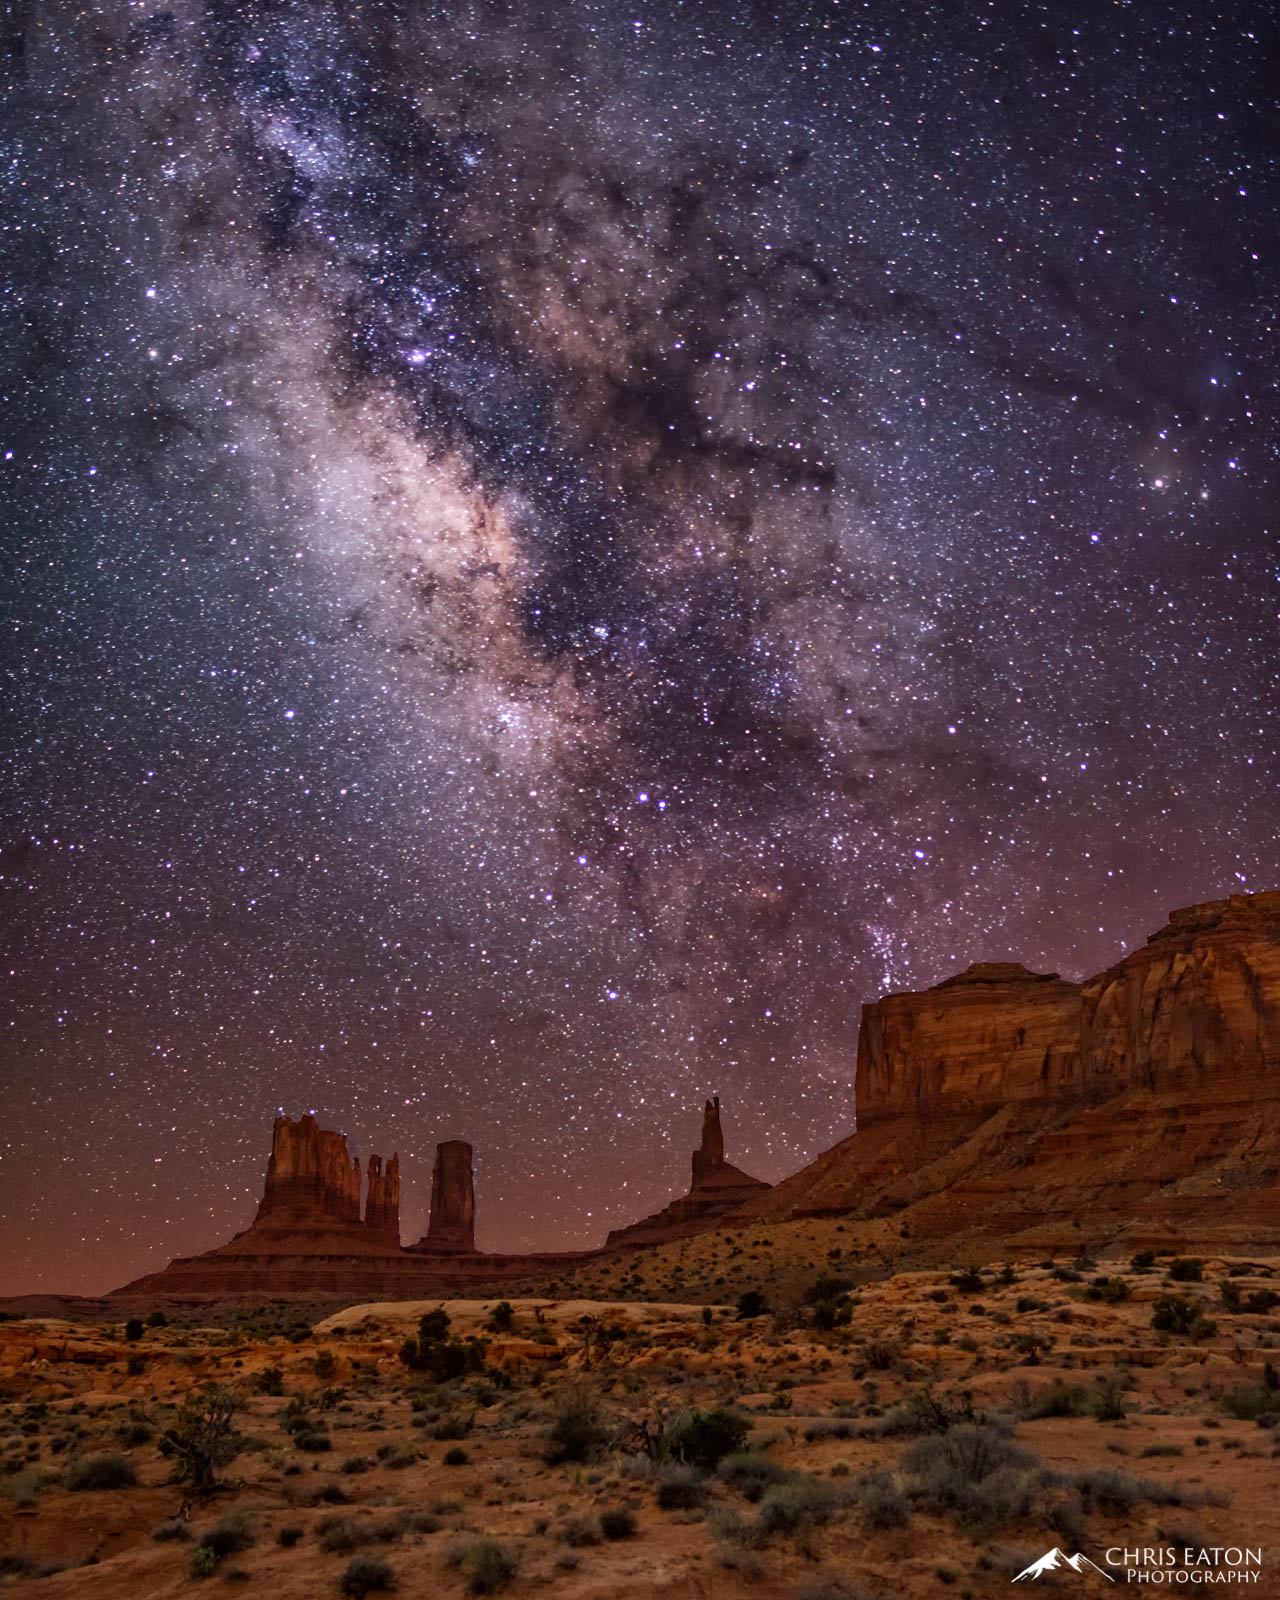 The center of the Milky Way Galaxy rises above The Stagecoach, Big Indian, and Brigham's Tomb formations in Monumernt Valley Navajo Tribal Park.